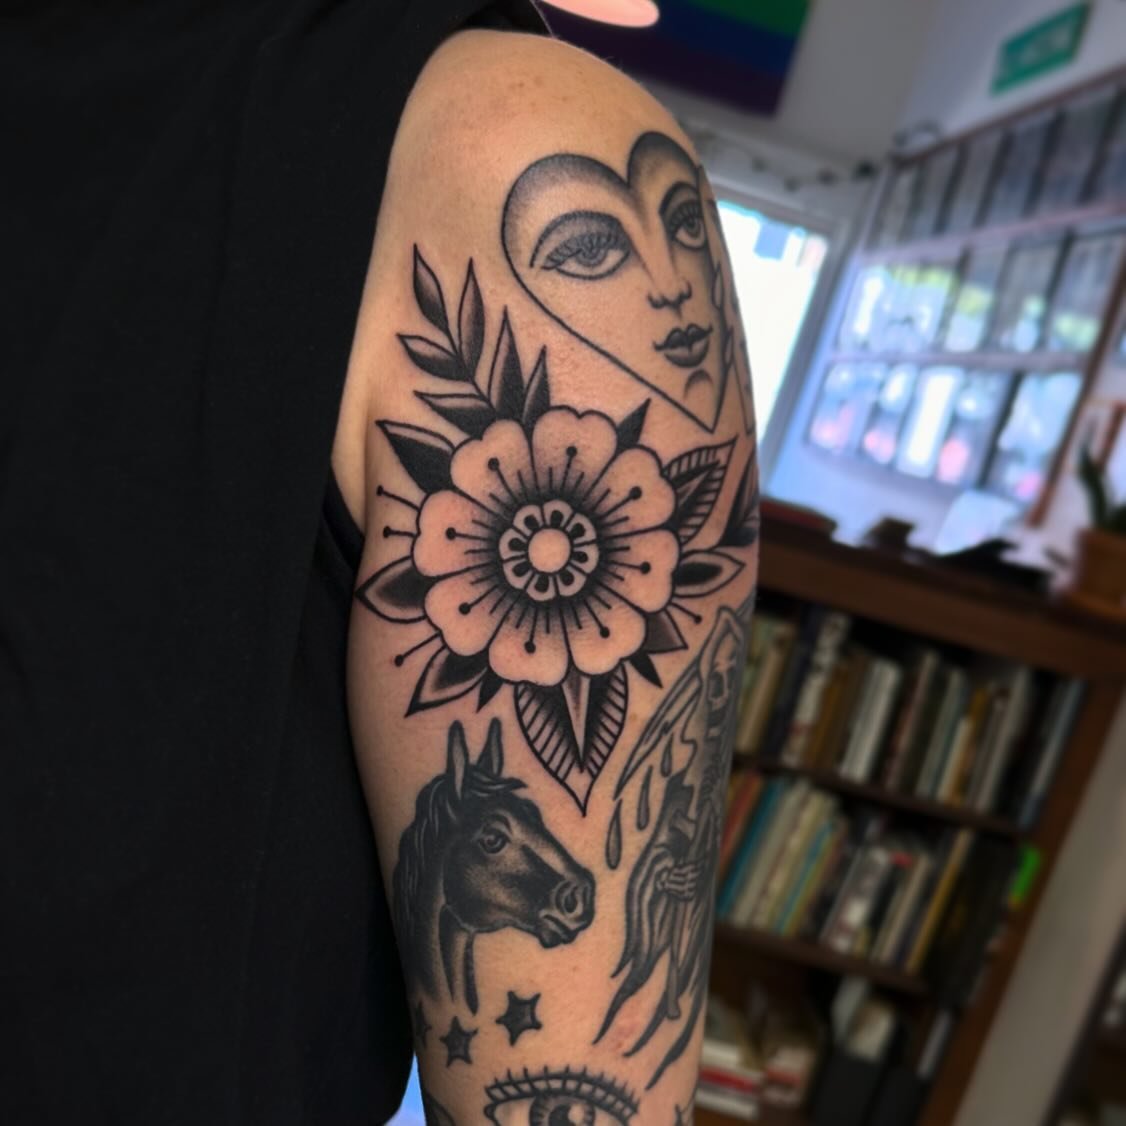 Flower filler for @_beth_________ 

As an artist, it is very gratifying to fill in those pesky areas on people&rsquo;s sleeves. Thanks for the trust! Let&rsquo;s do more filler! 

#portland#tattoo#pdx#pdxtattooartist#flowertattoo#ttt#highwaytattoo#ch